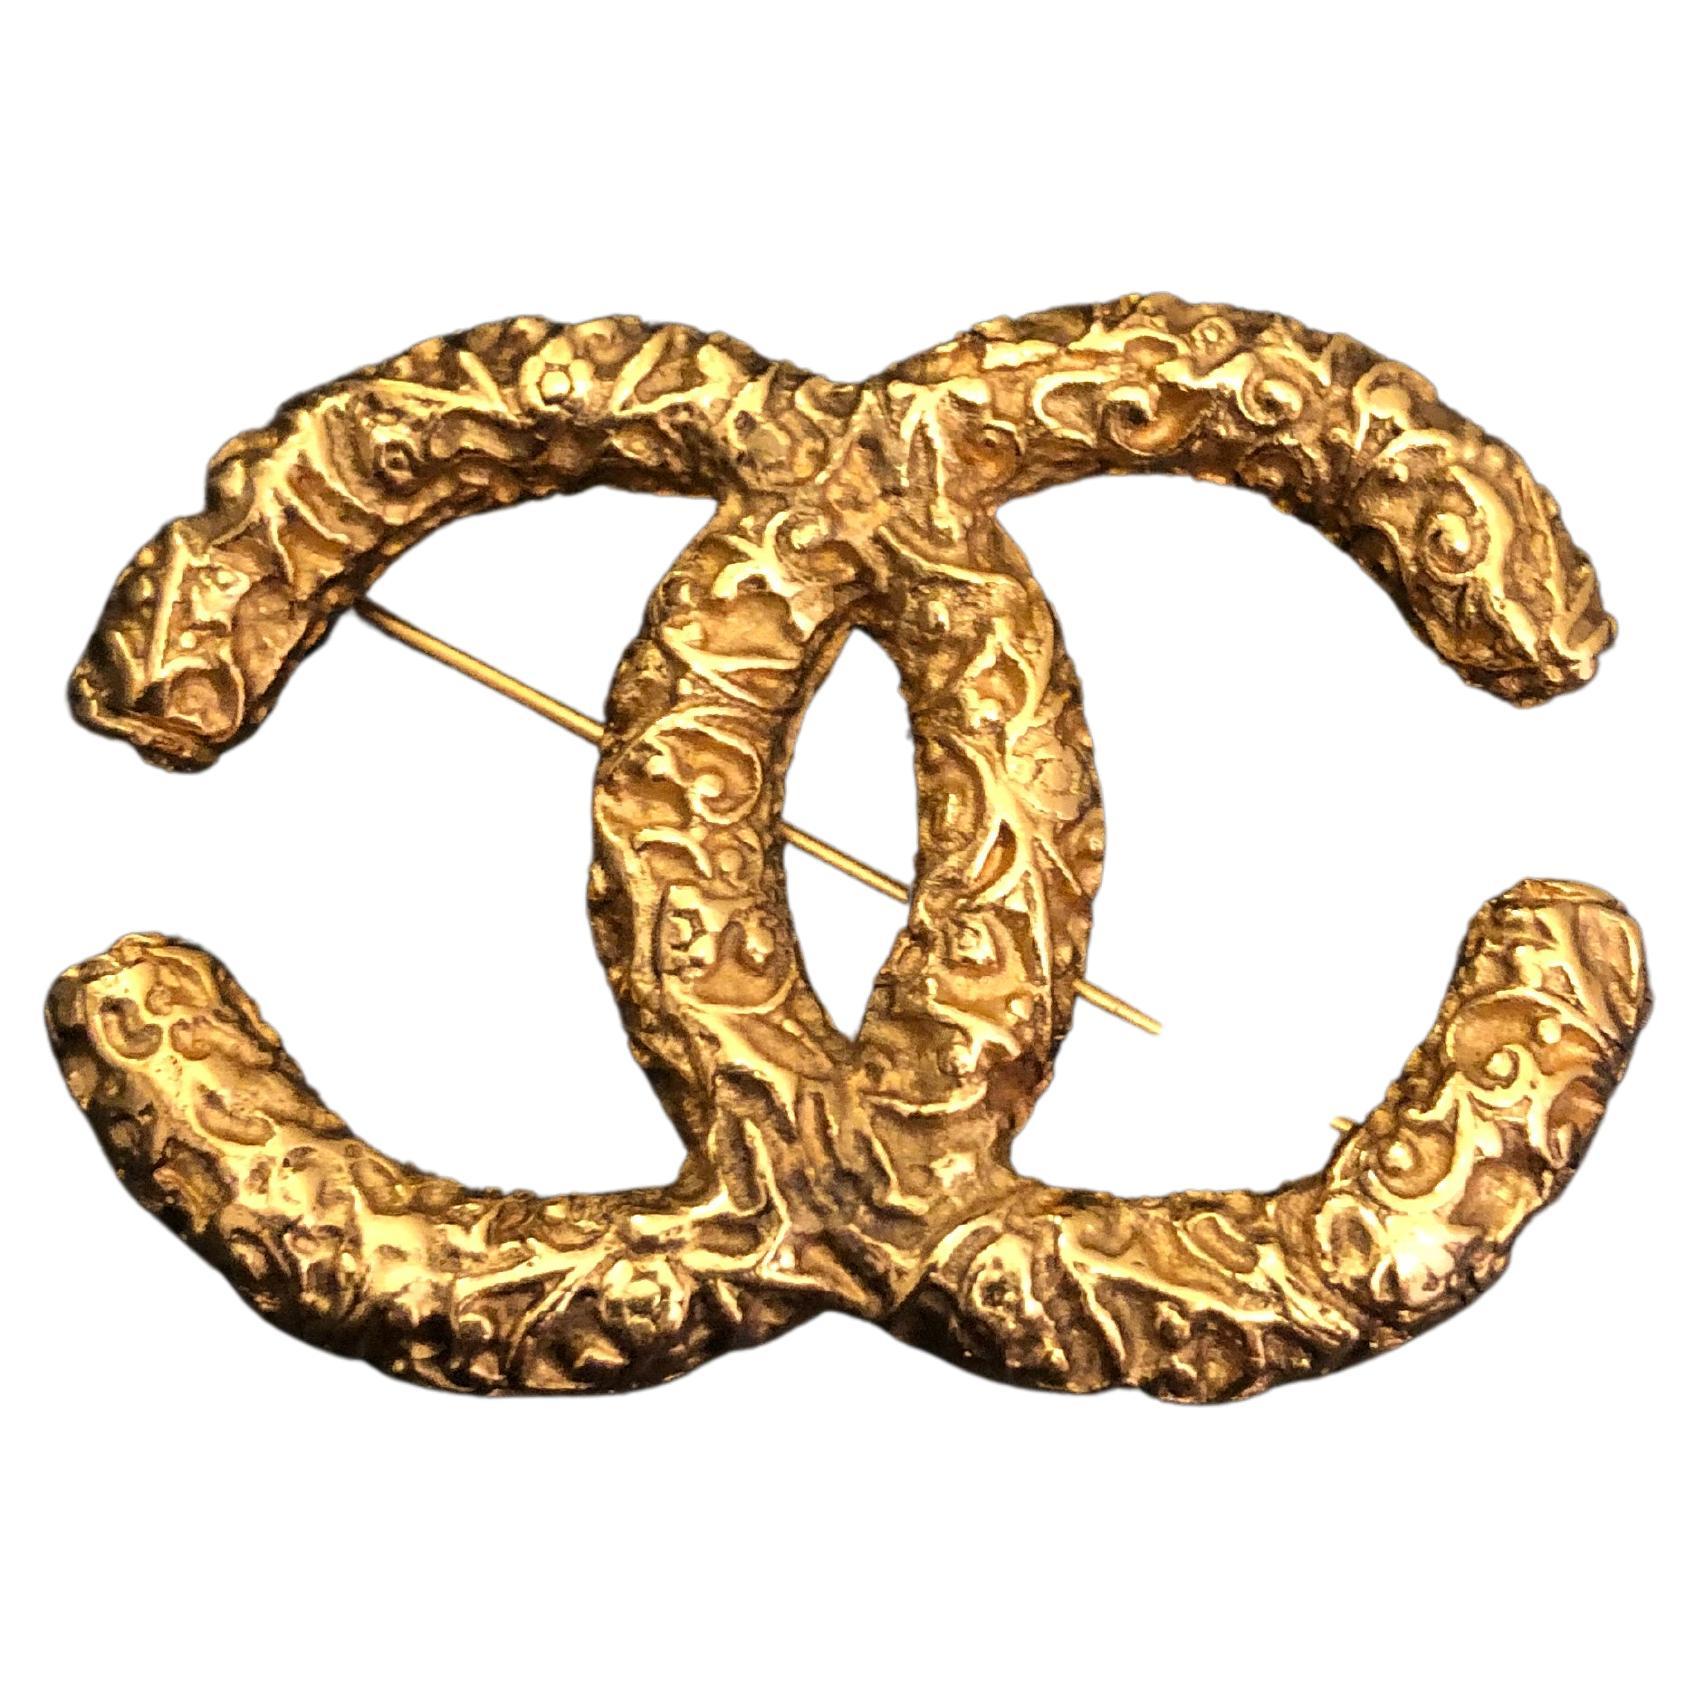 1993 Vintage CHANEL Gold Toned Floral Textured CC Chain Brooch 93A For Sale